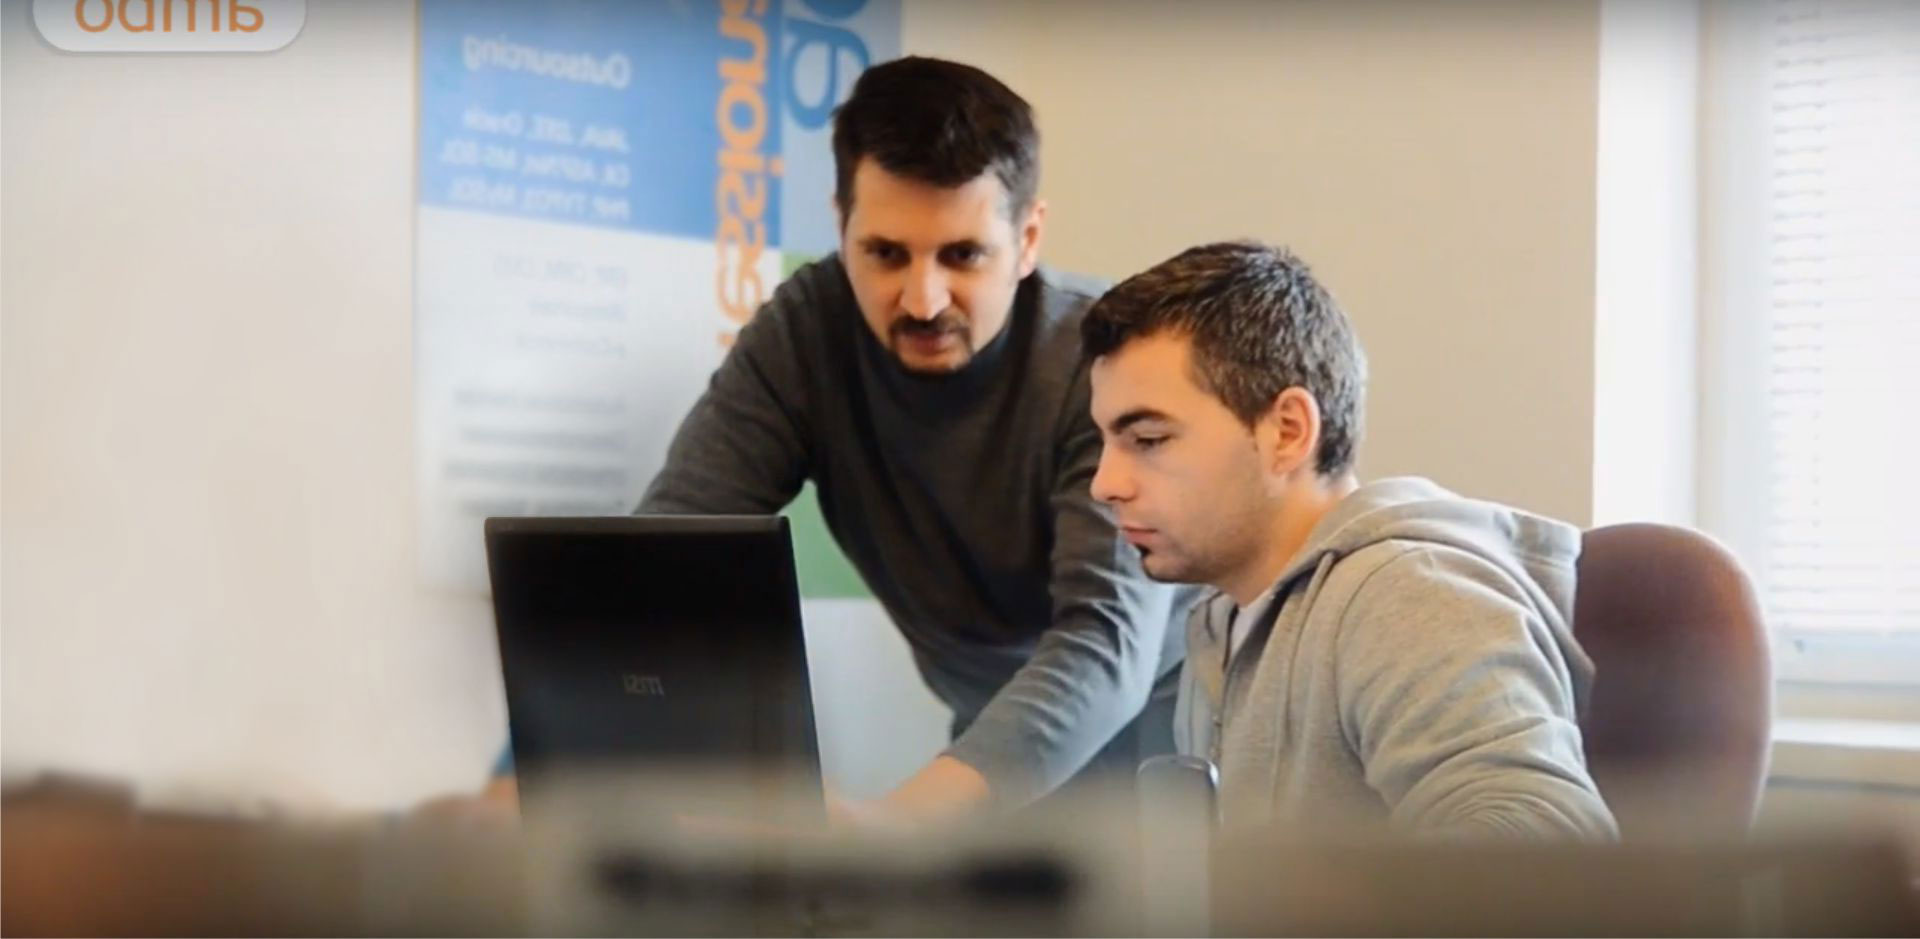 software development, developers in front of a laptop